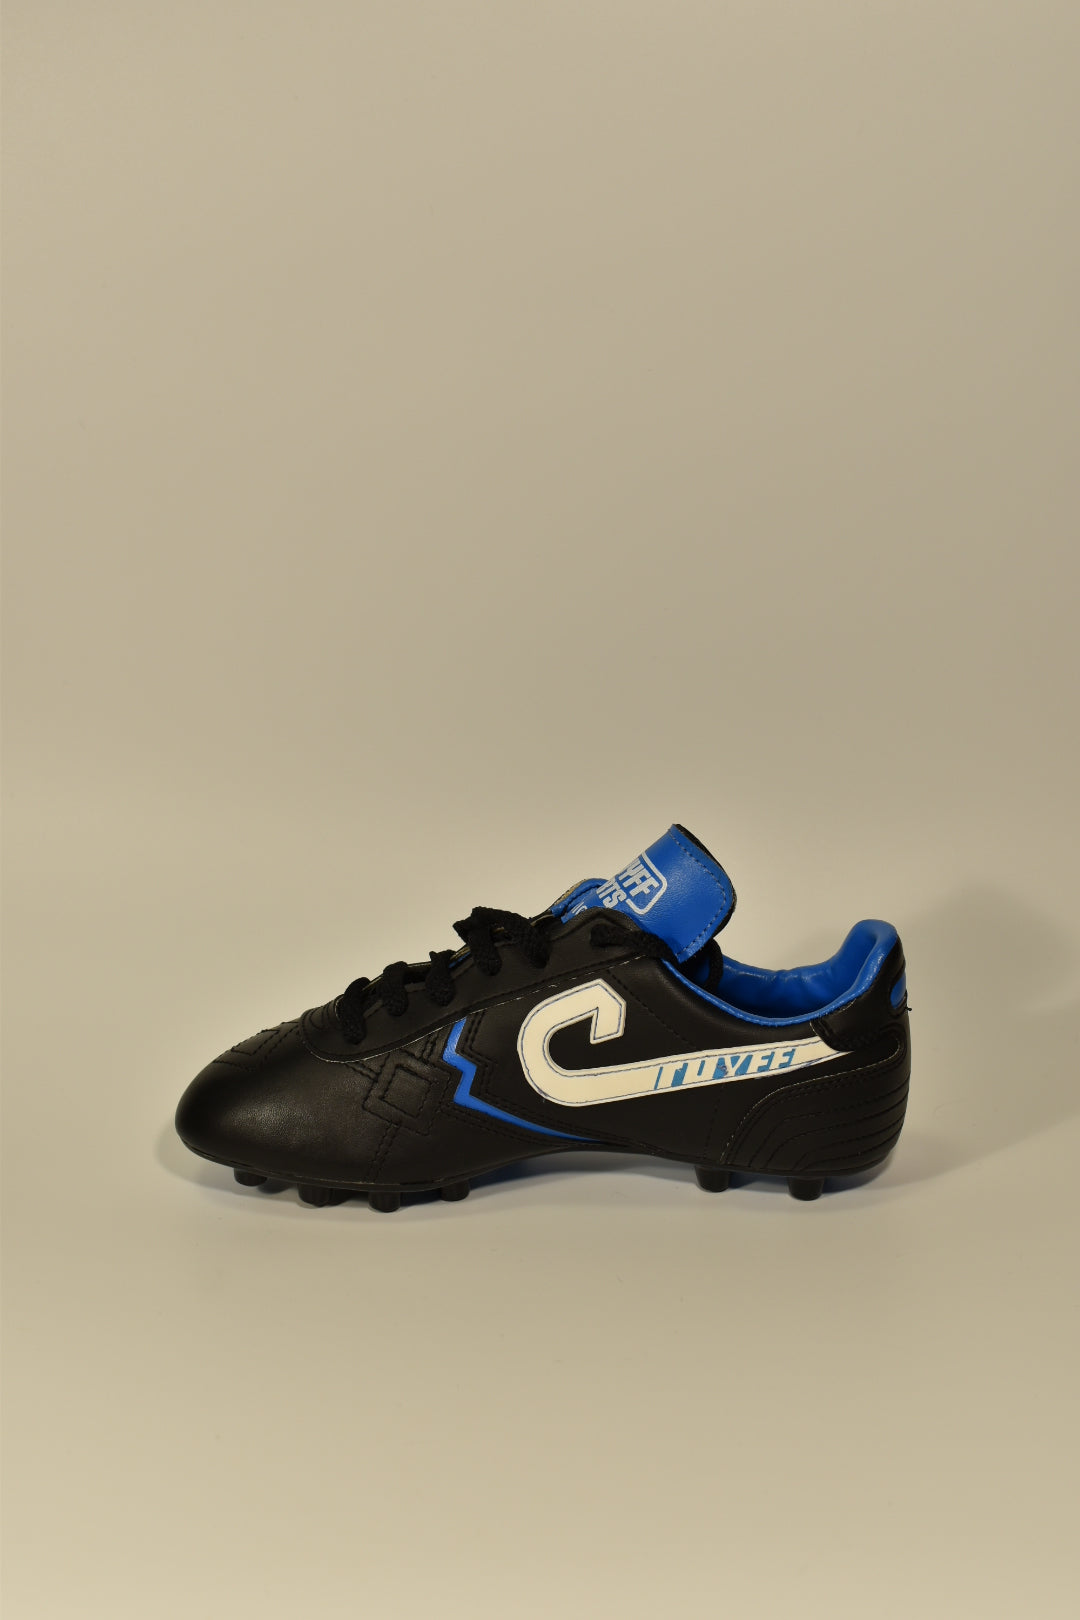 SPECIAL CRUYFF SENIOR FOOTBALL BOOTS FROM THE 2000'S.